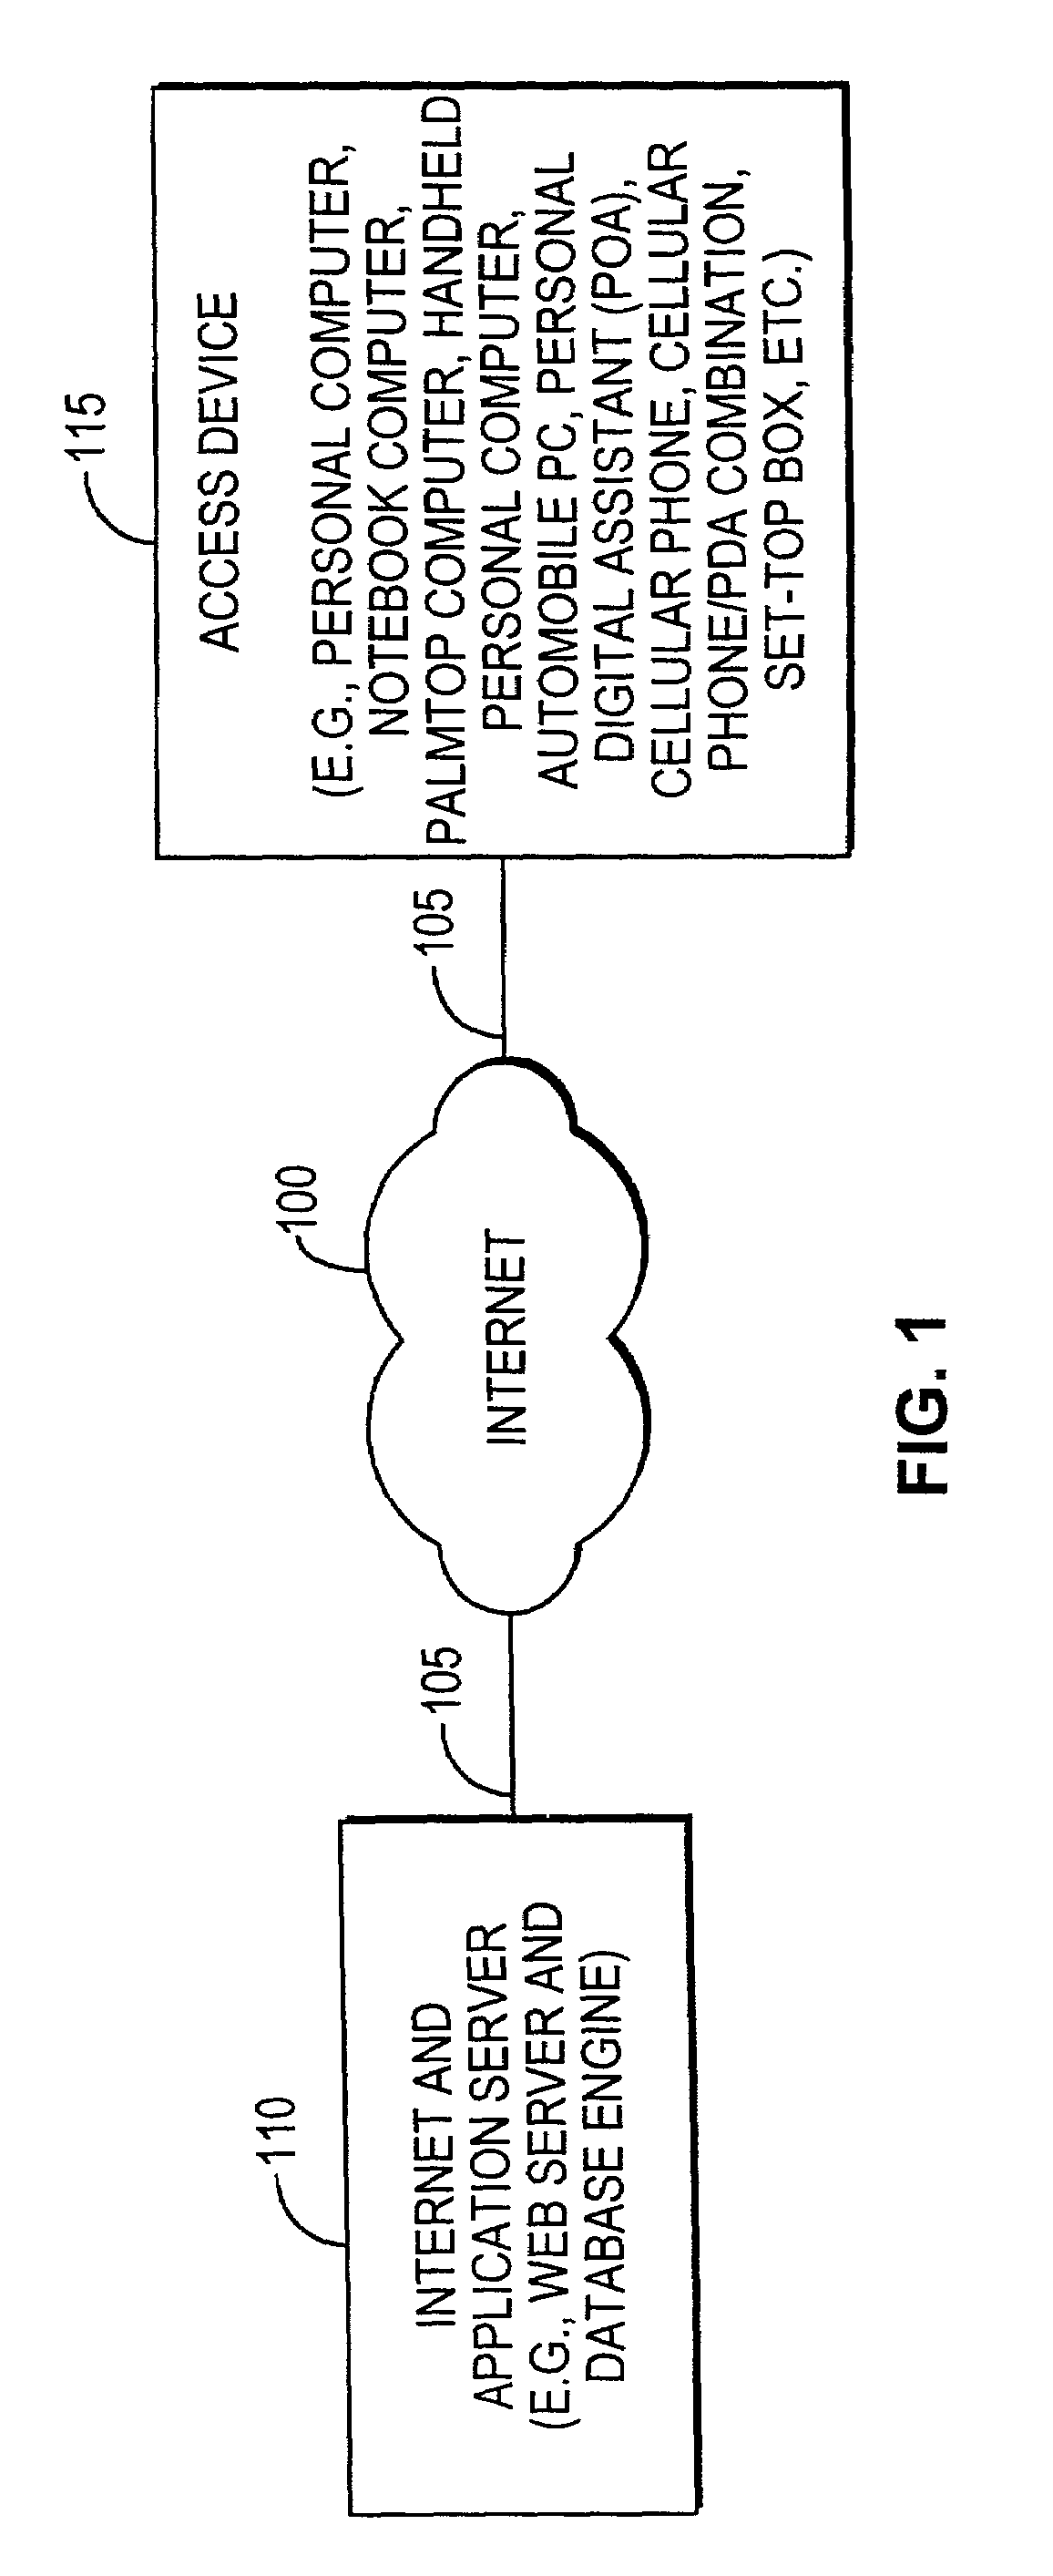 Systems and methods for performing parametric searches